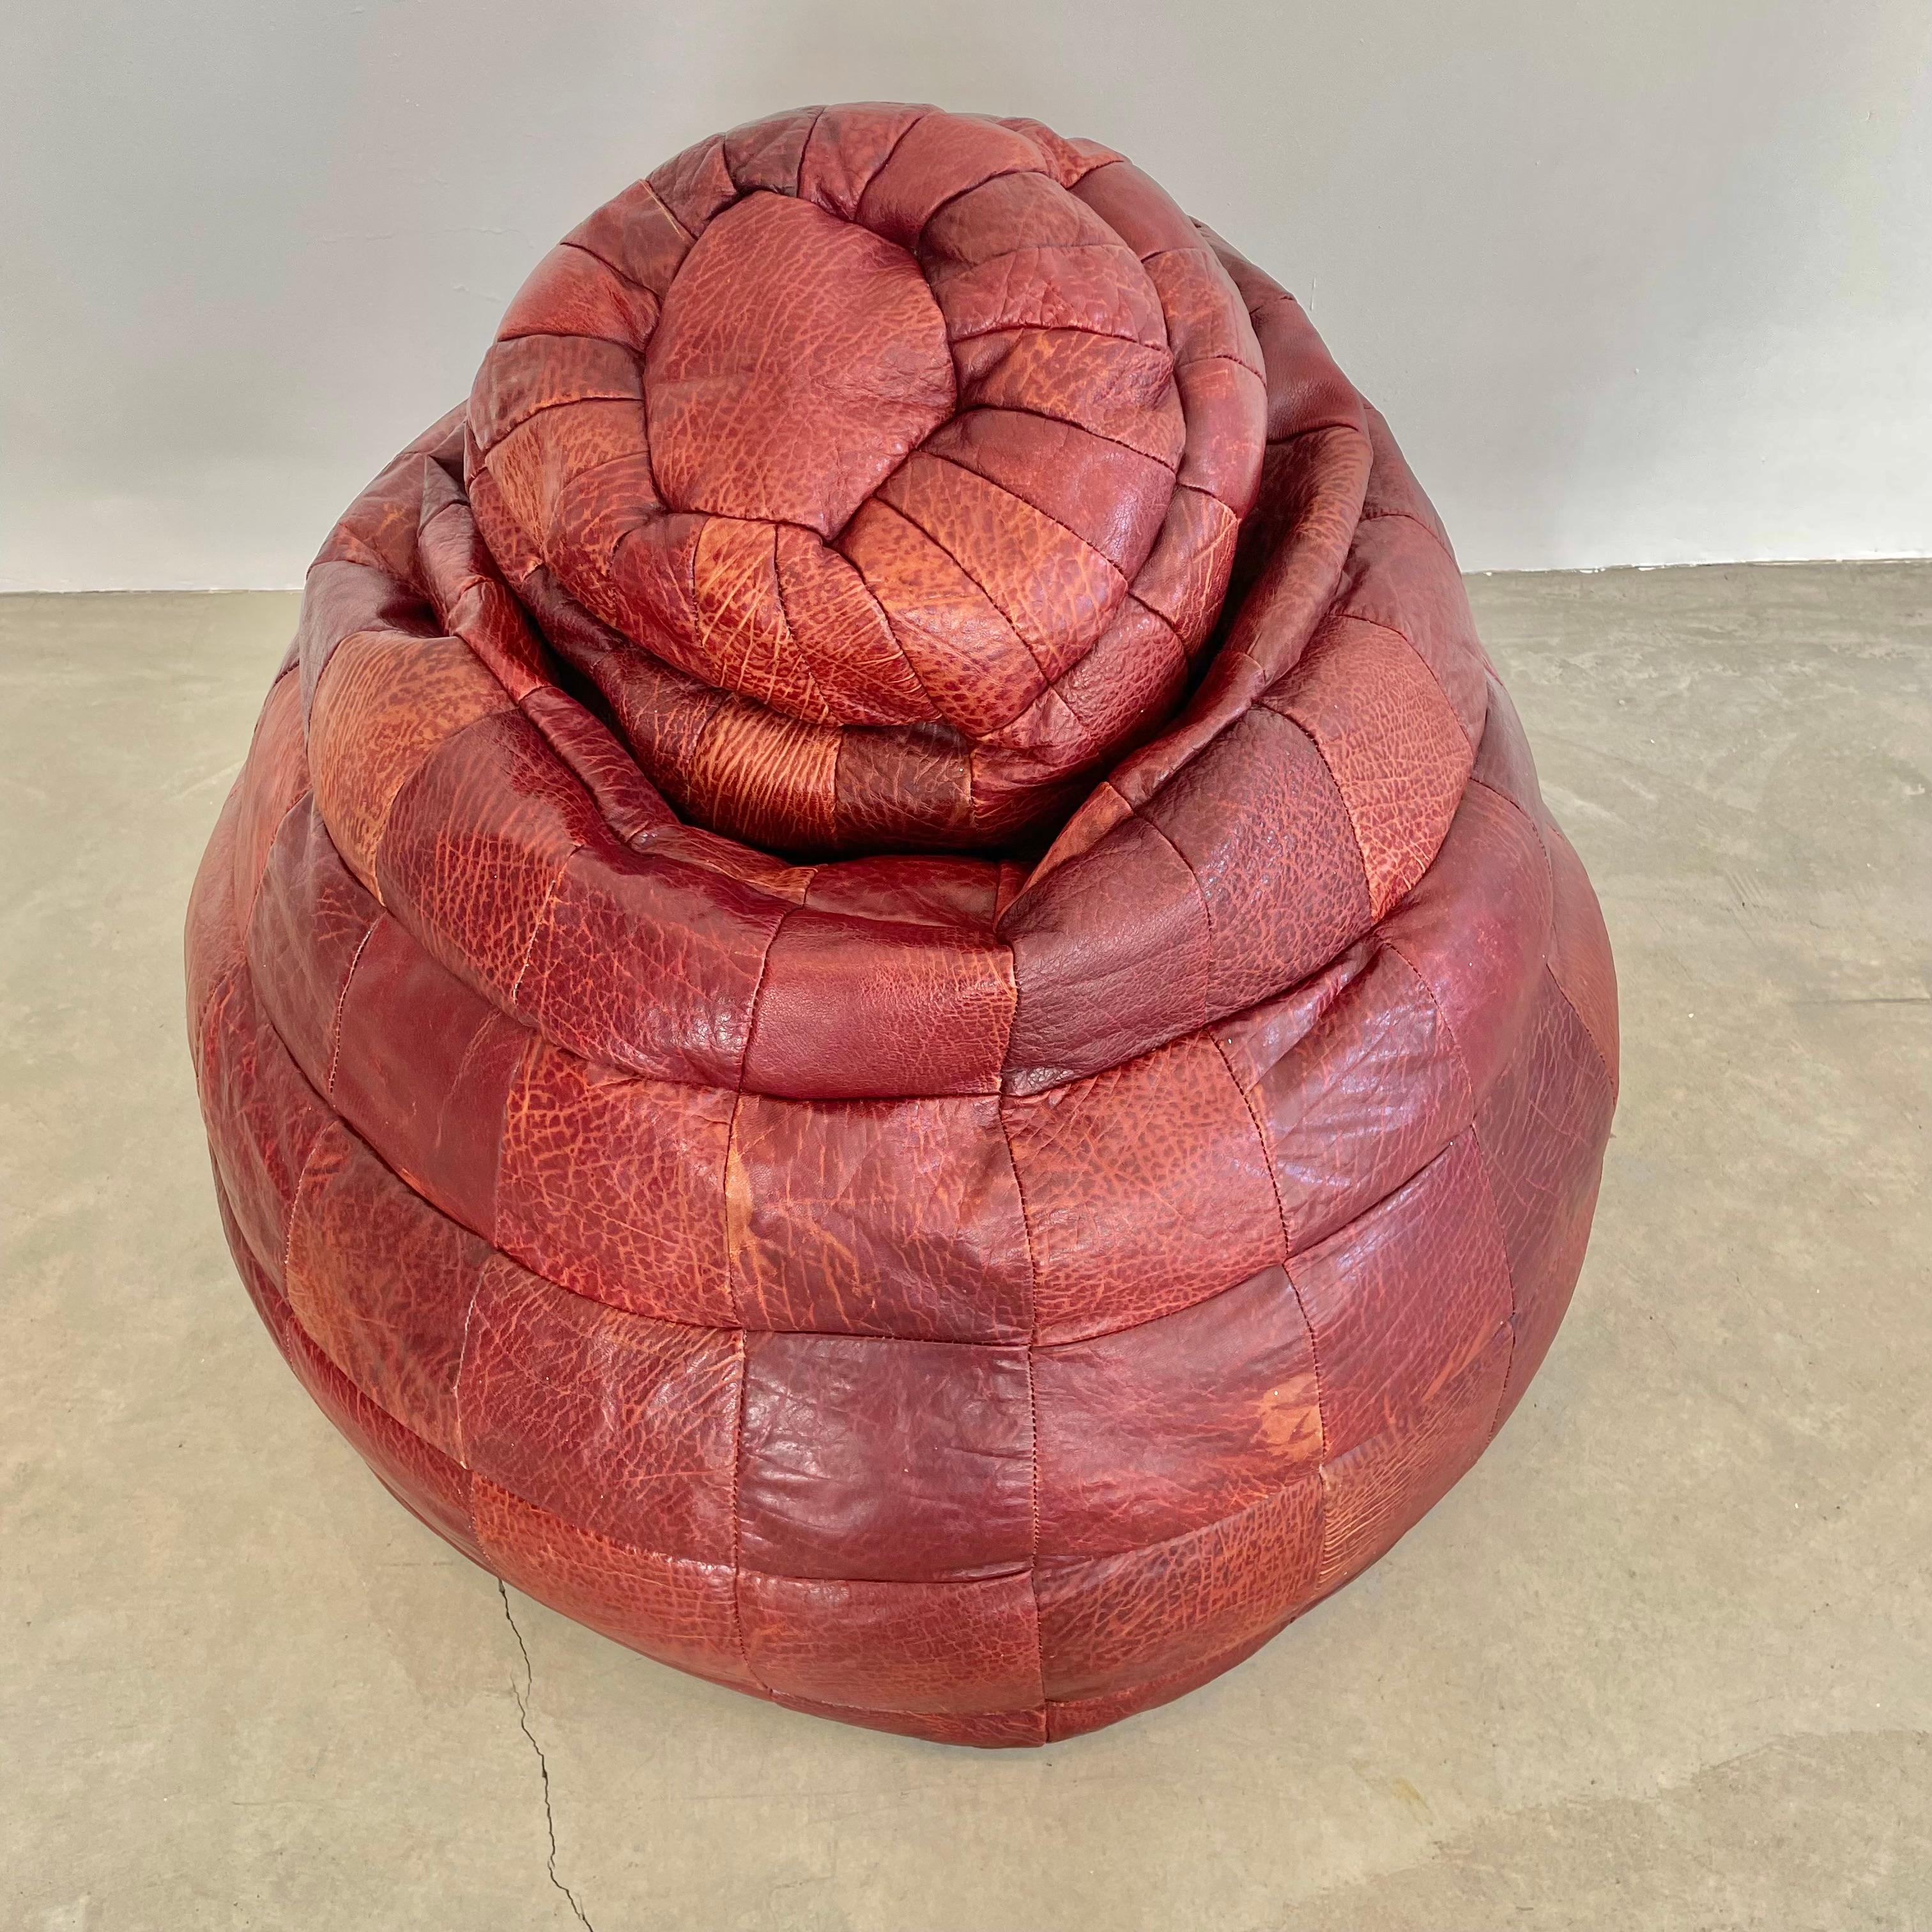 Gorgeous oxblood leather patchwork beanbag manufactured by Swiss company De Sede in the 1970s. Wonderful warm coloring and patina to leather with amazing veining to the leather dye. Some very light scuffs give the bag some life and personality. Good